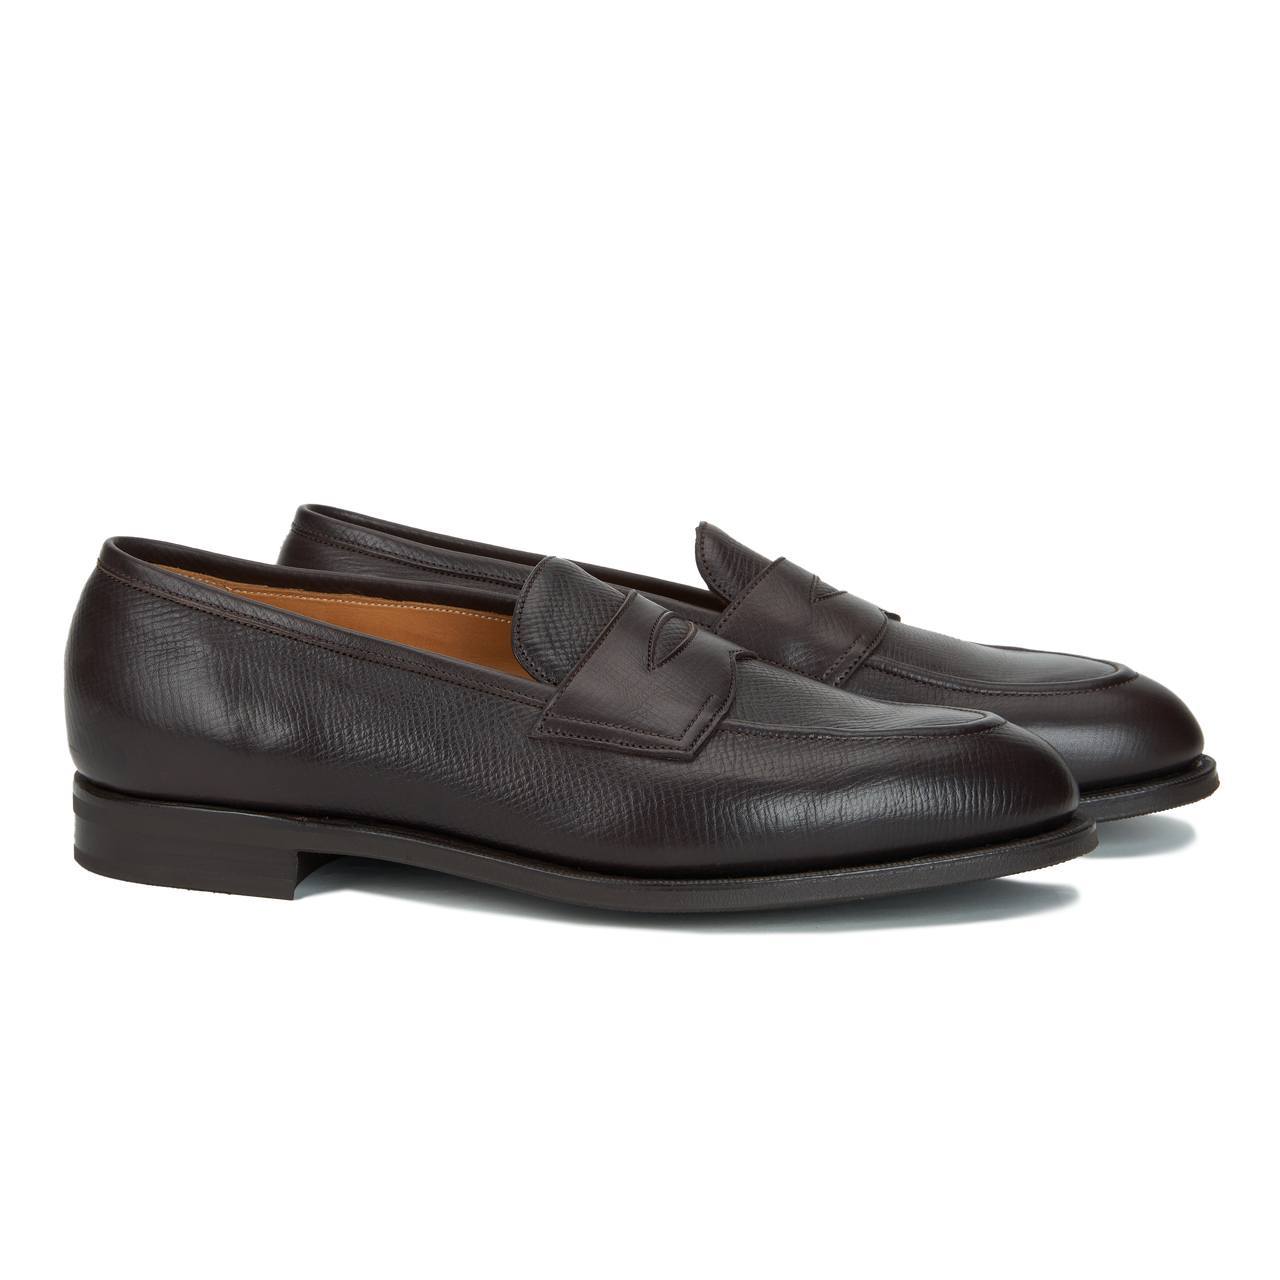 Edward Green Piccadilly in Dark Brown Utah with Rubber Sole